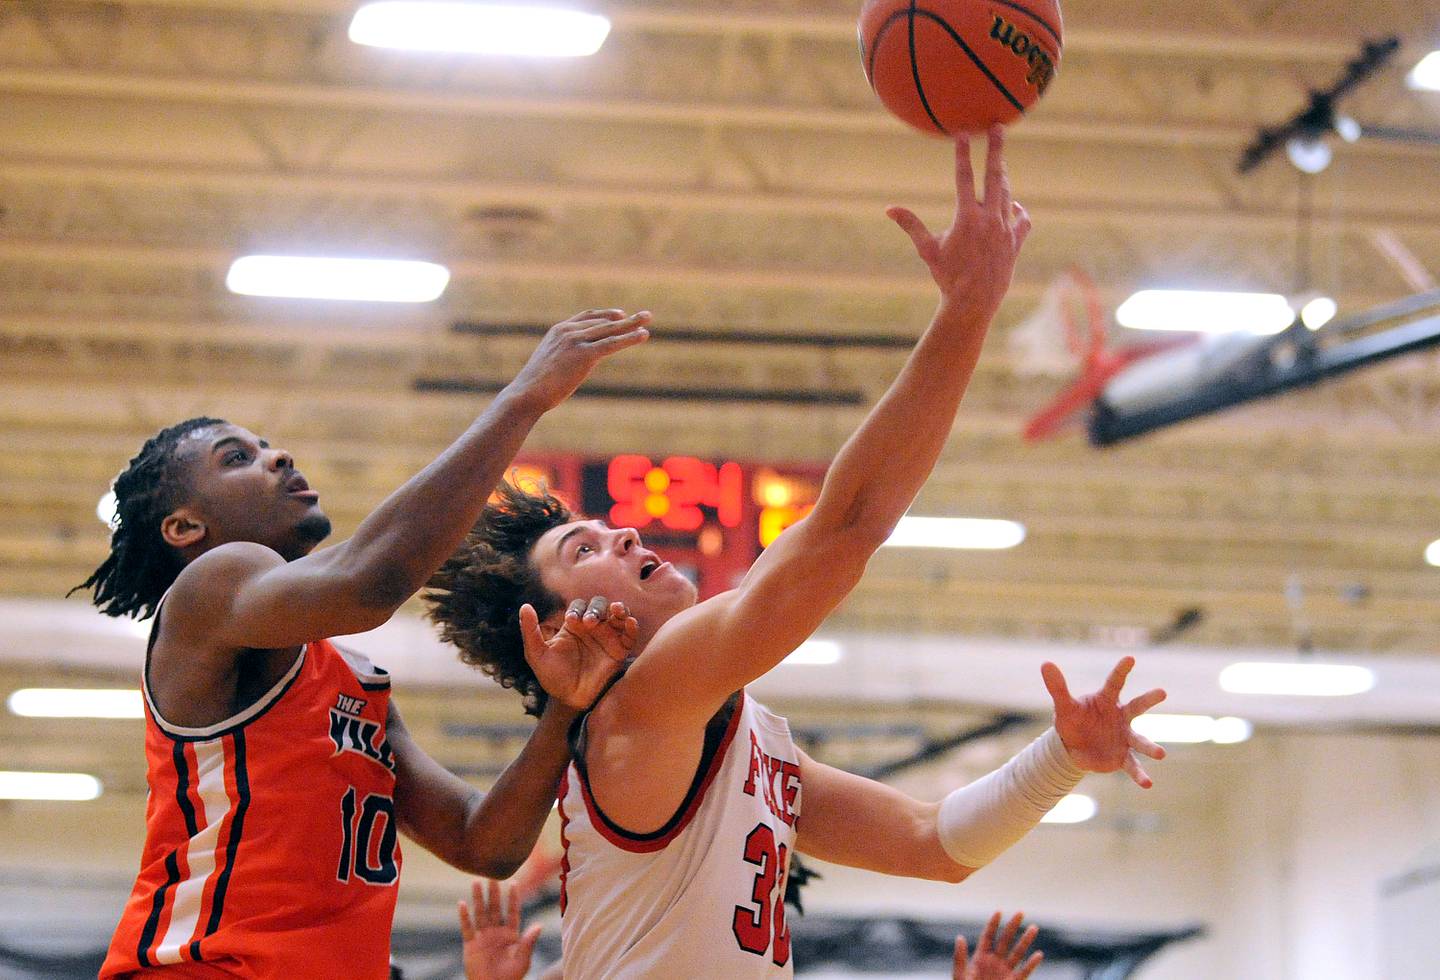 Yorkville's Bryce Salek makes a breakaway layup and get the foul by Romeoville defender Aaron Brown (10) during a boys' basketball game at Yorkville High School on Tuesday, Jan. 10, 2023.